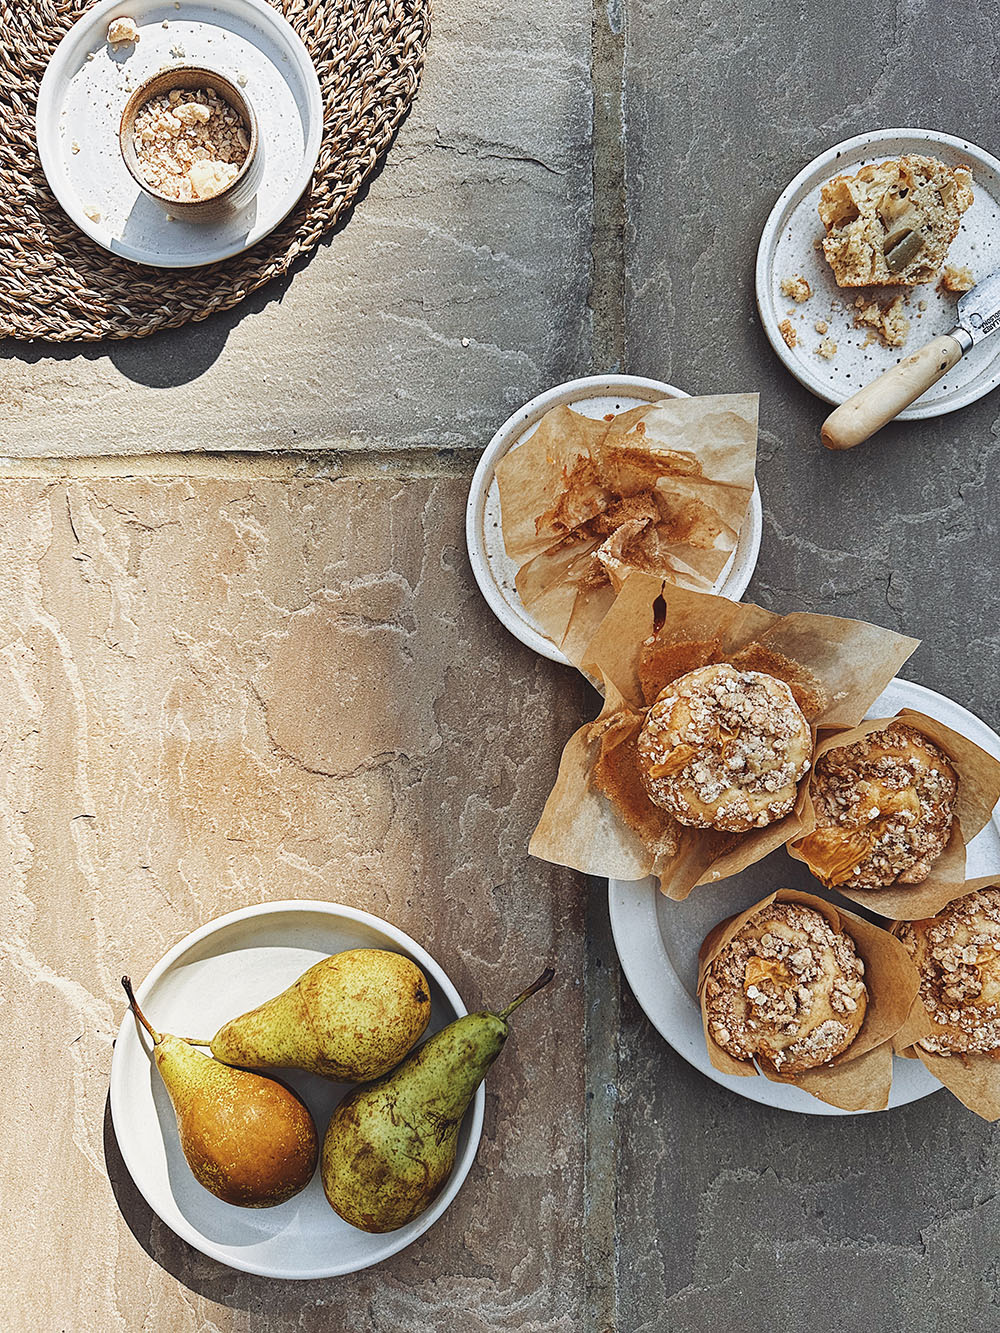 Five small plates are seen on a beige stone backdrop, one is filled with pears and the others with crumble and custard muffins, some half eaten in the sunshine